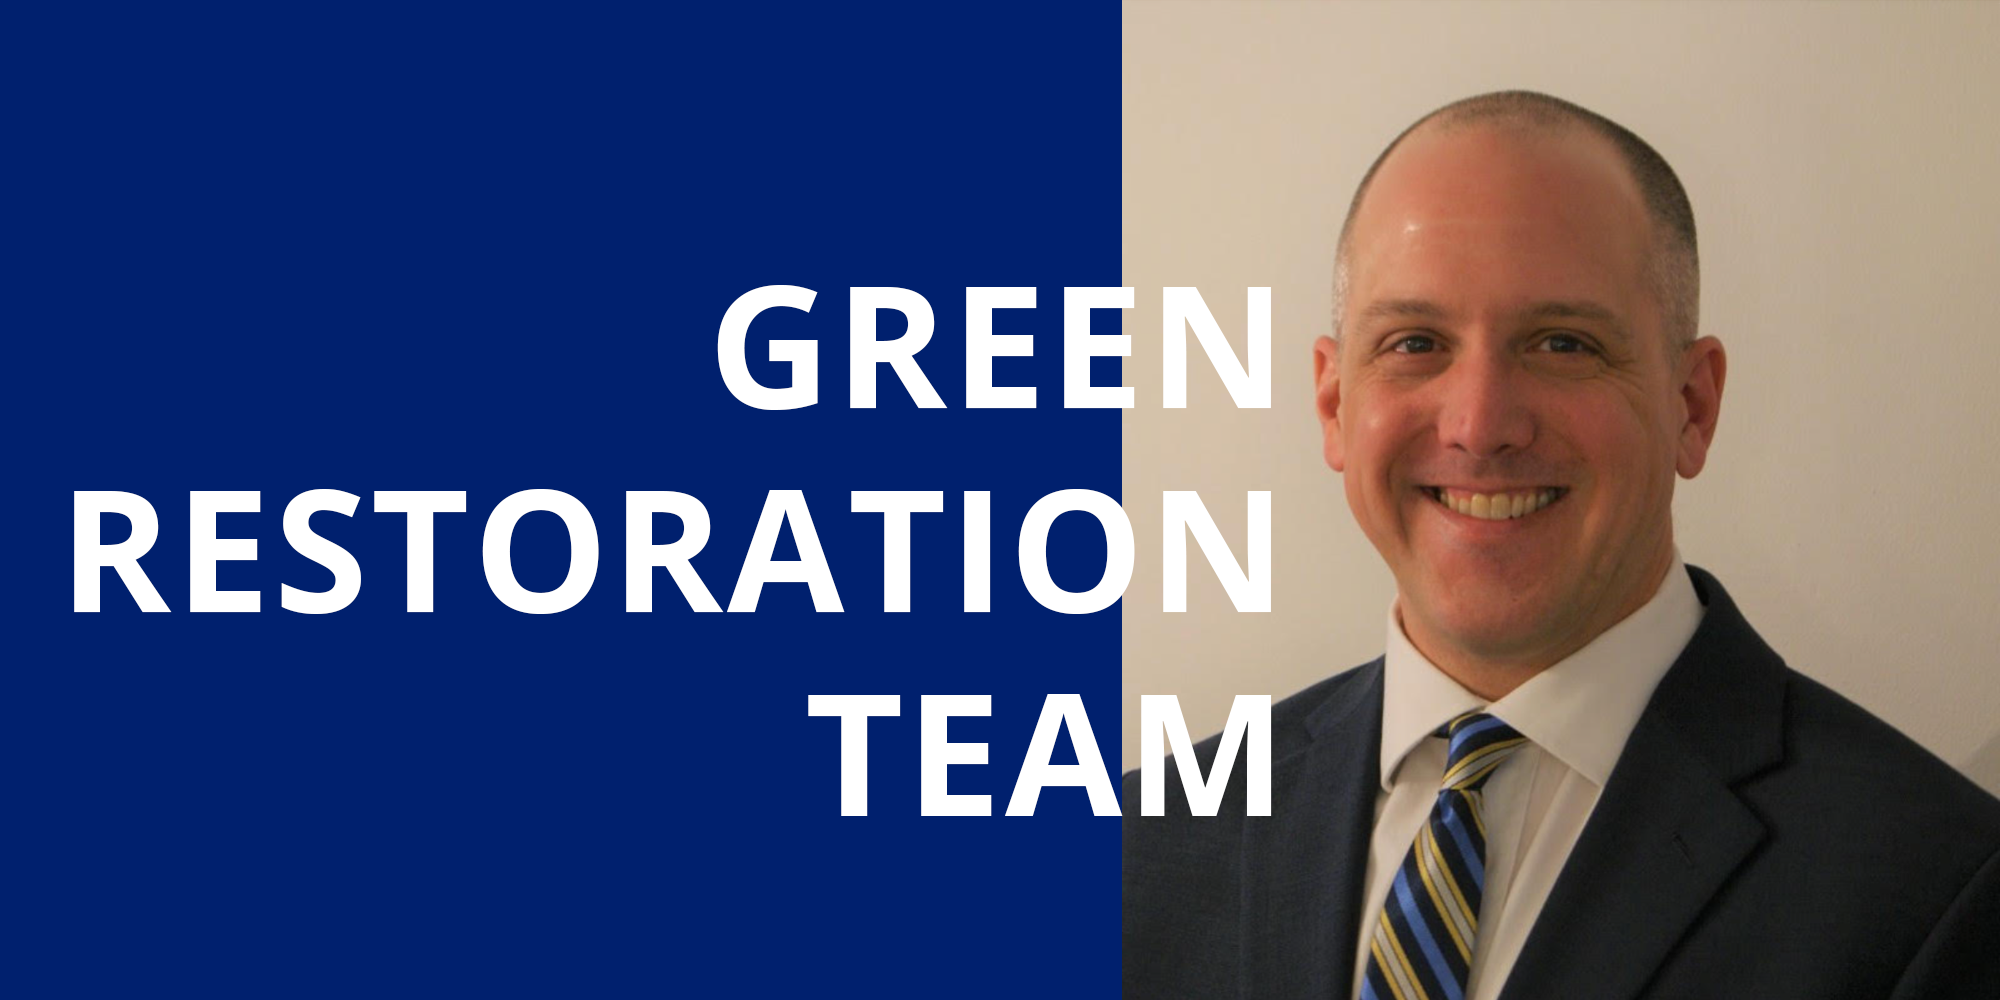 Welcome to the Green Restoration Team